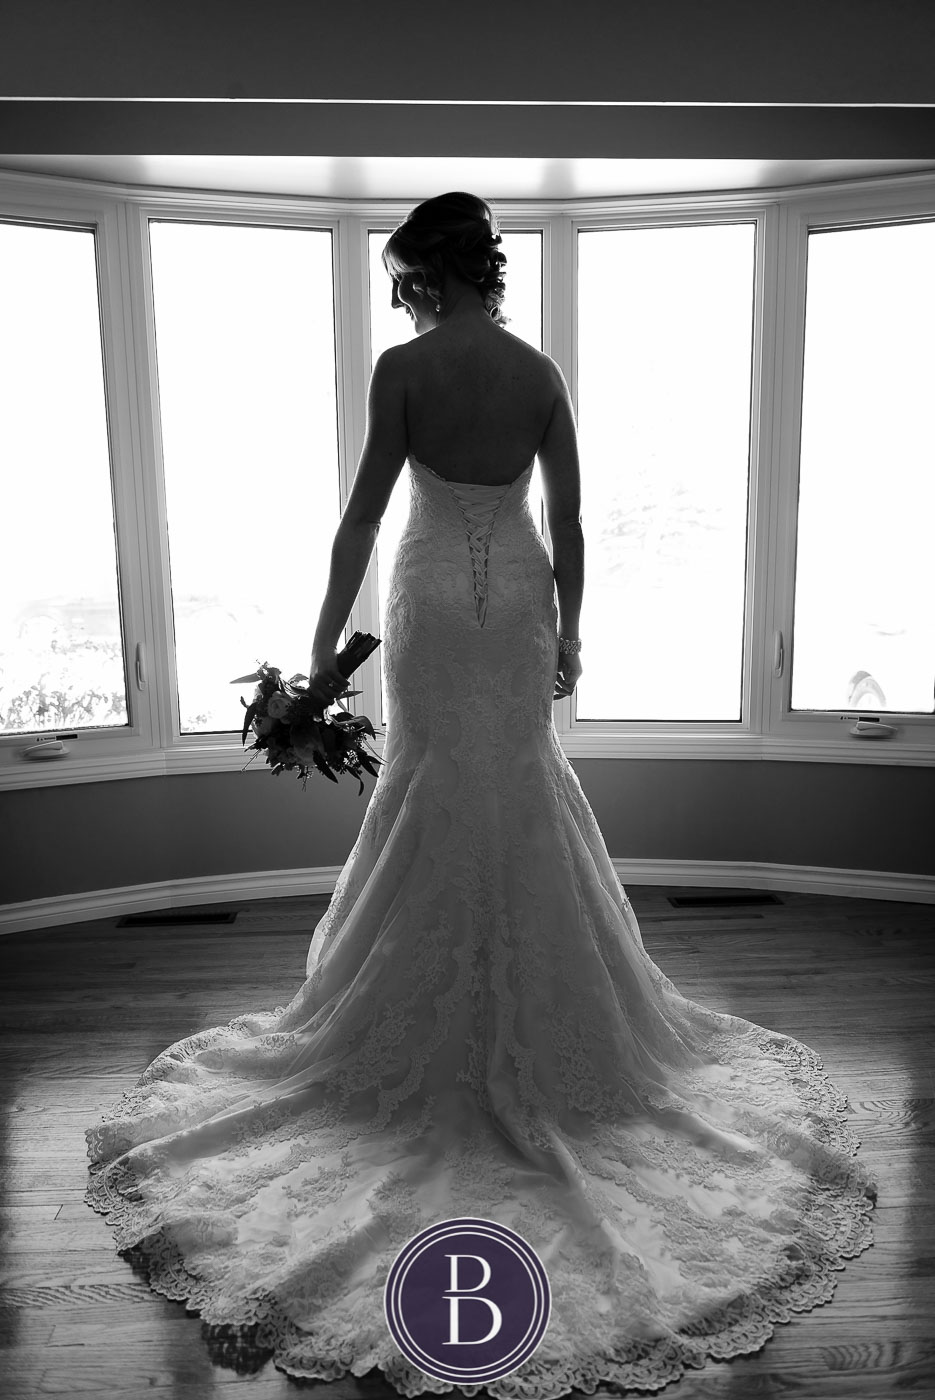 Bride with bouquet getting ready portrait for wedding